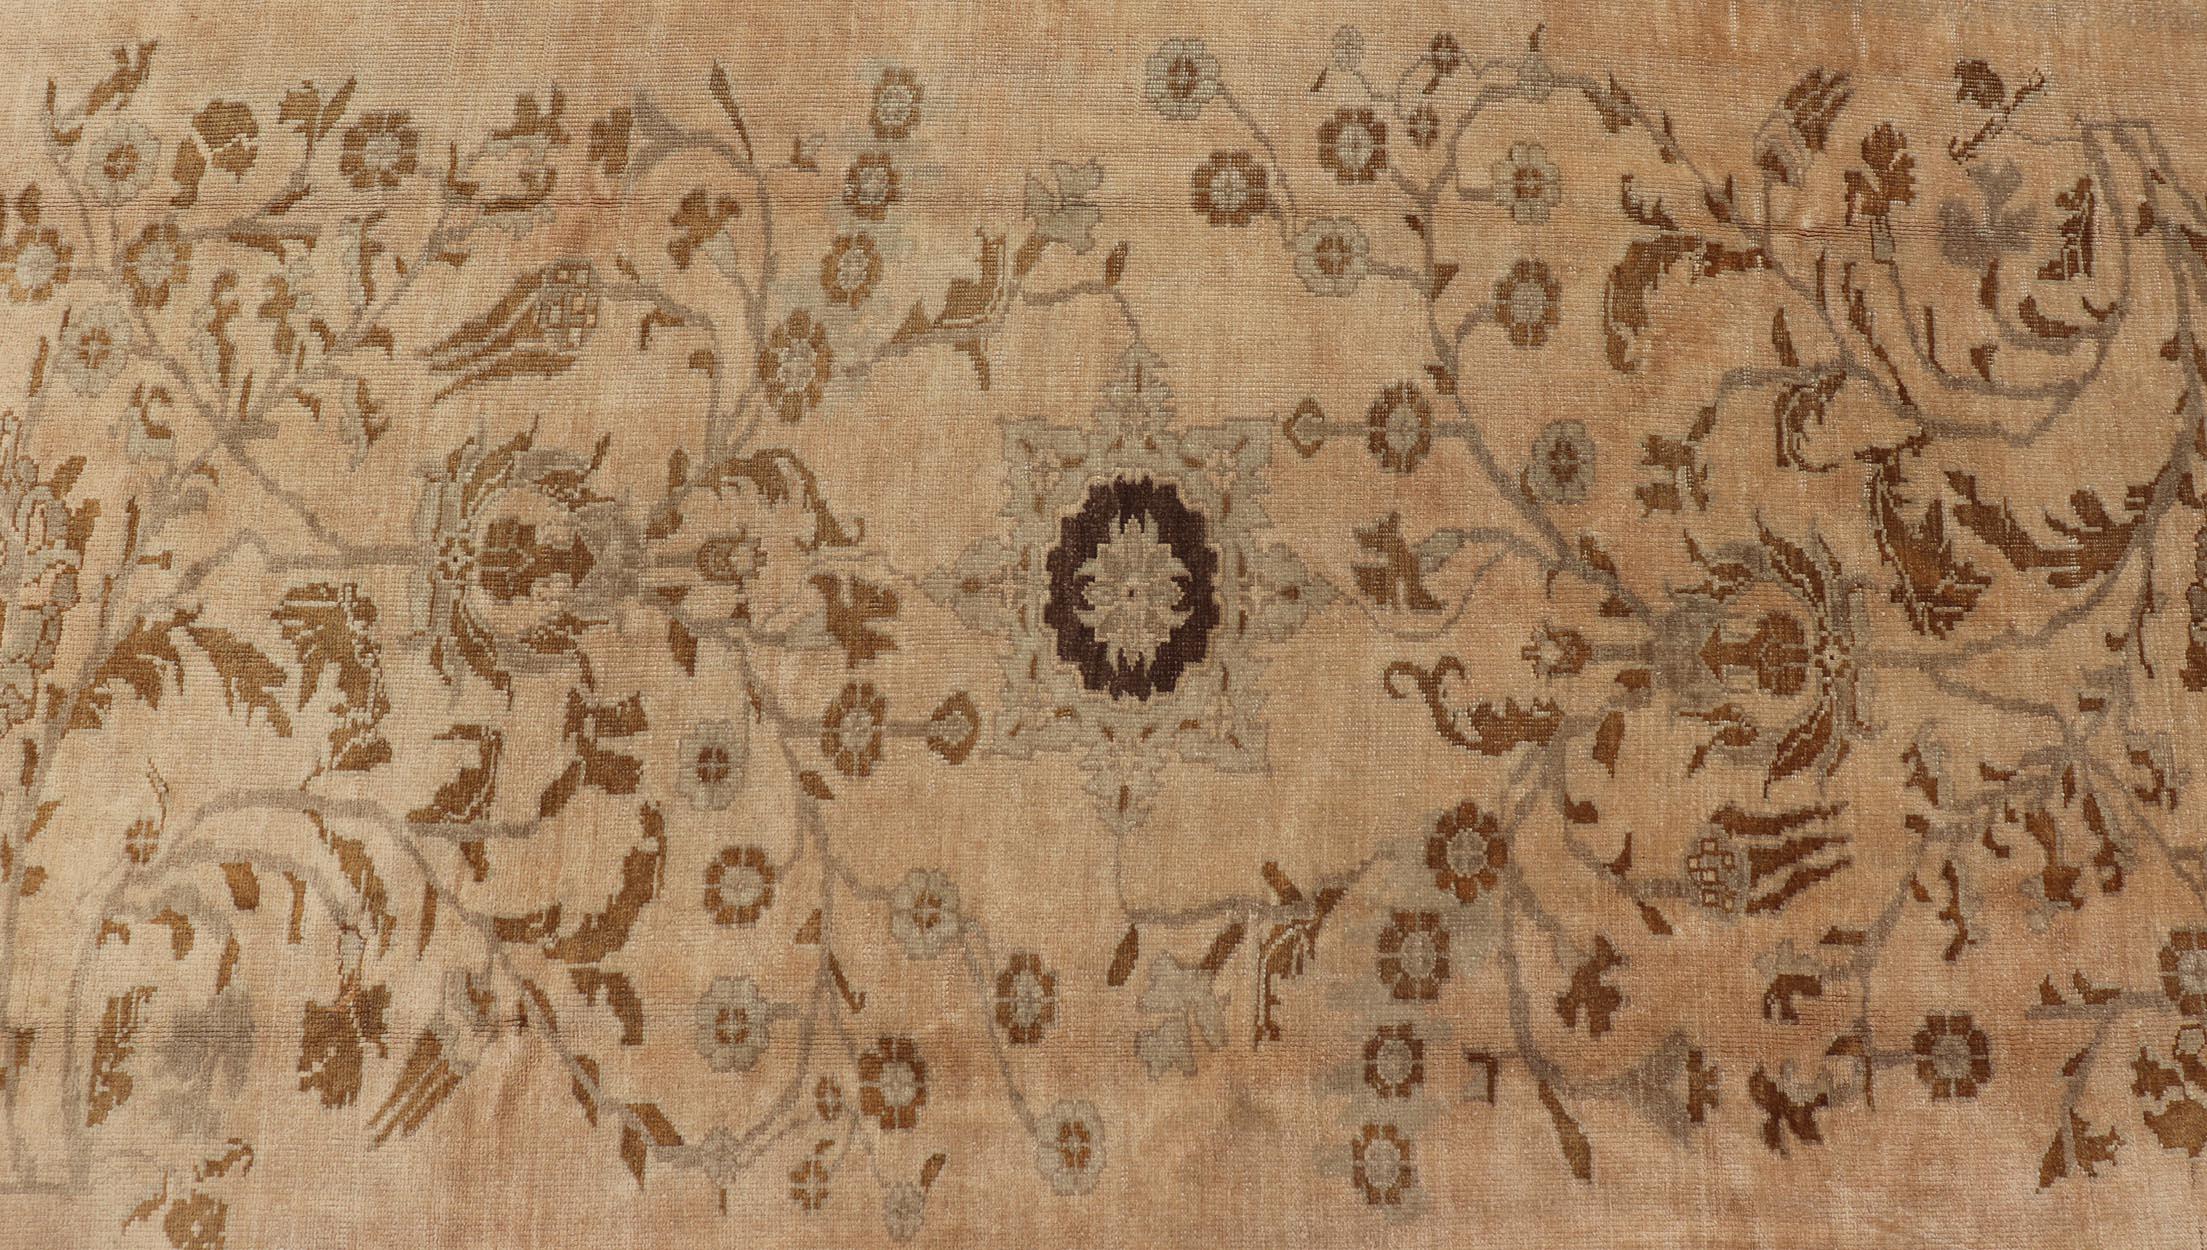 Measures: 6'9 x 9'11

The Oushak wool rug features two oversized medallions with detailed vines and flowers. A framework of floral motifs and stylized branches form the border and beautifully complements the aesthetic of this carpet. This rug has